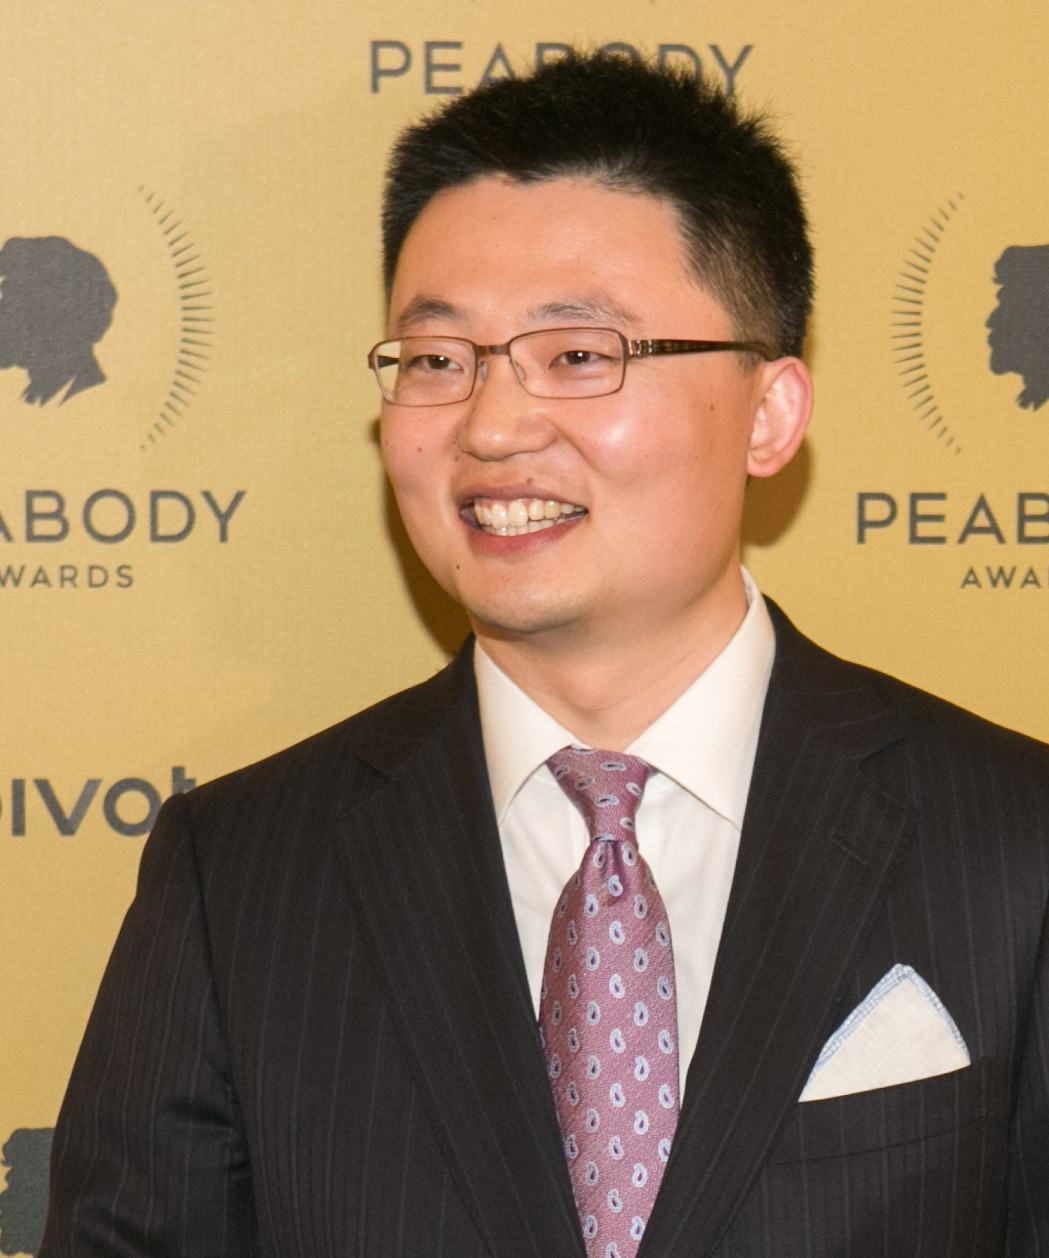 Leon Lee attends The 74th Annual Peabody Awards Ceremony at Cipriani Wall Street on May 31, 2015 in New York City